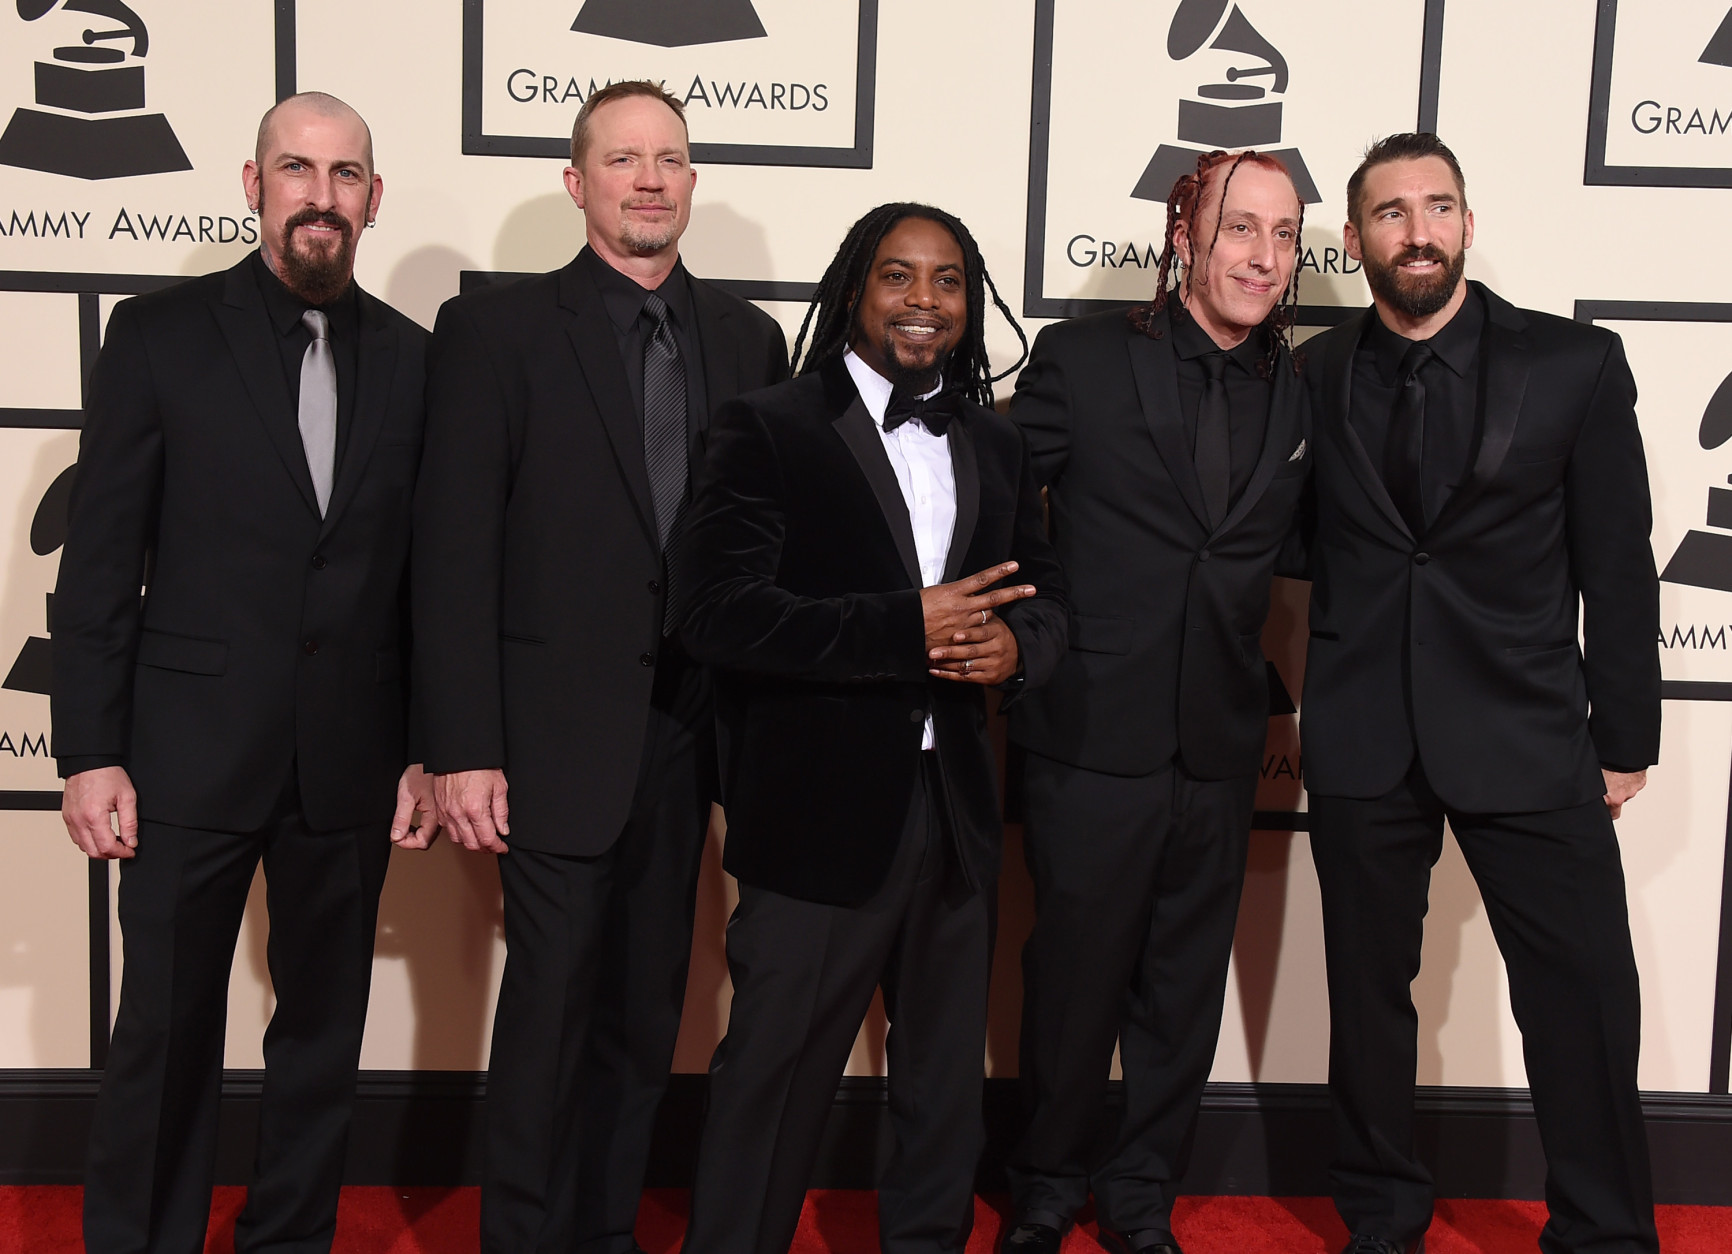 John Connolly, from left, Vince Hornsby, Lajon Witherspoon, Morgan Rose and Clint Lowery, of Sevendust, arrive at the 58th annual Grammy Awards at the Staples Center on Monday, Feb. 15, 2016, in Los Angeles. (Photo by Jordan Strauss/Invision/AP)